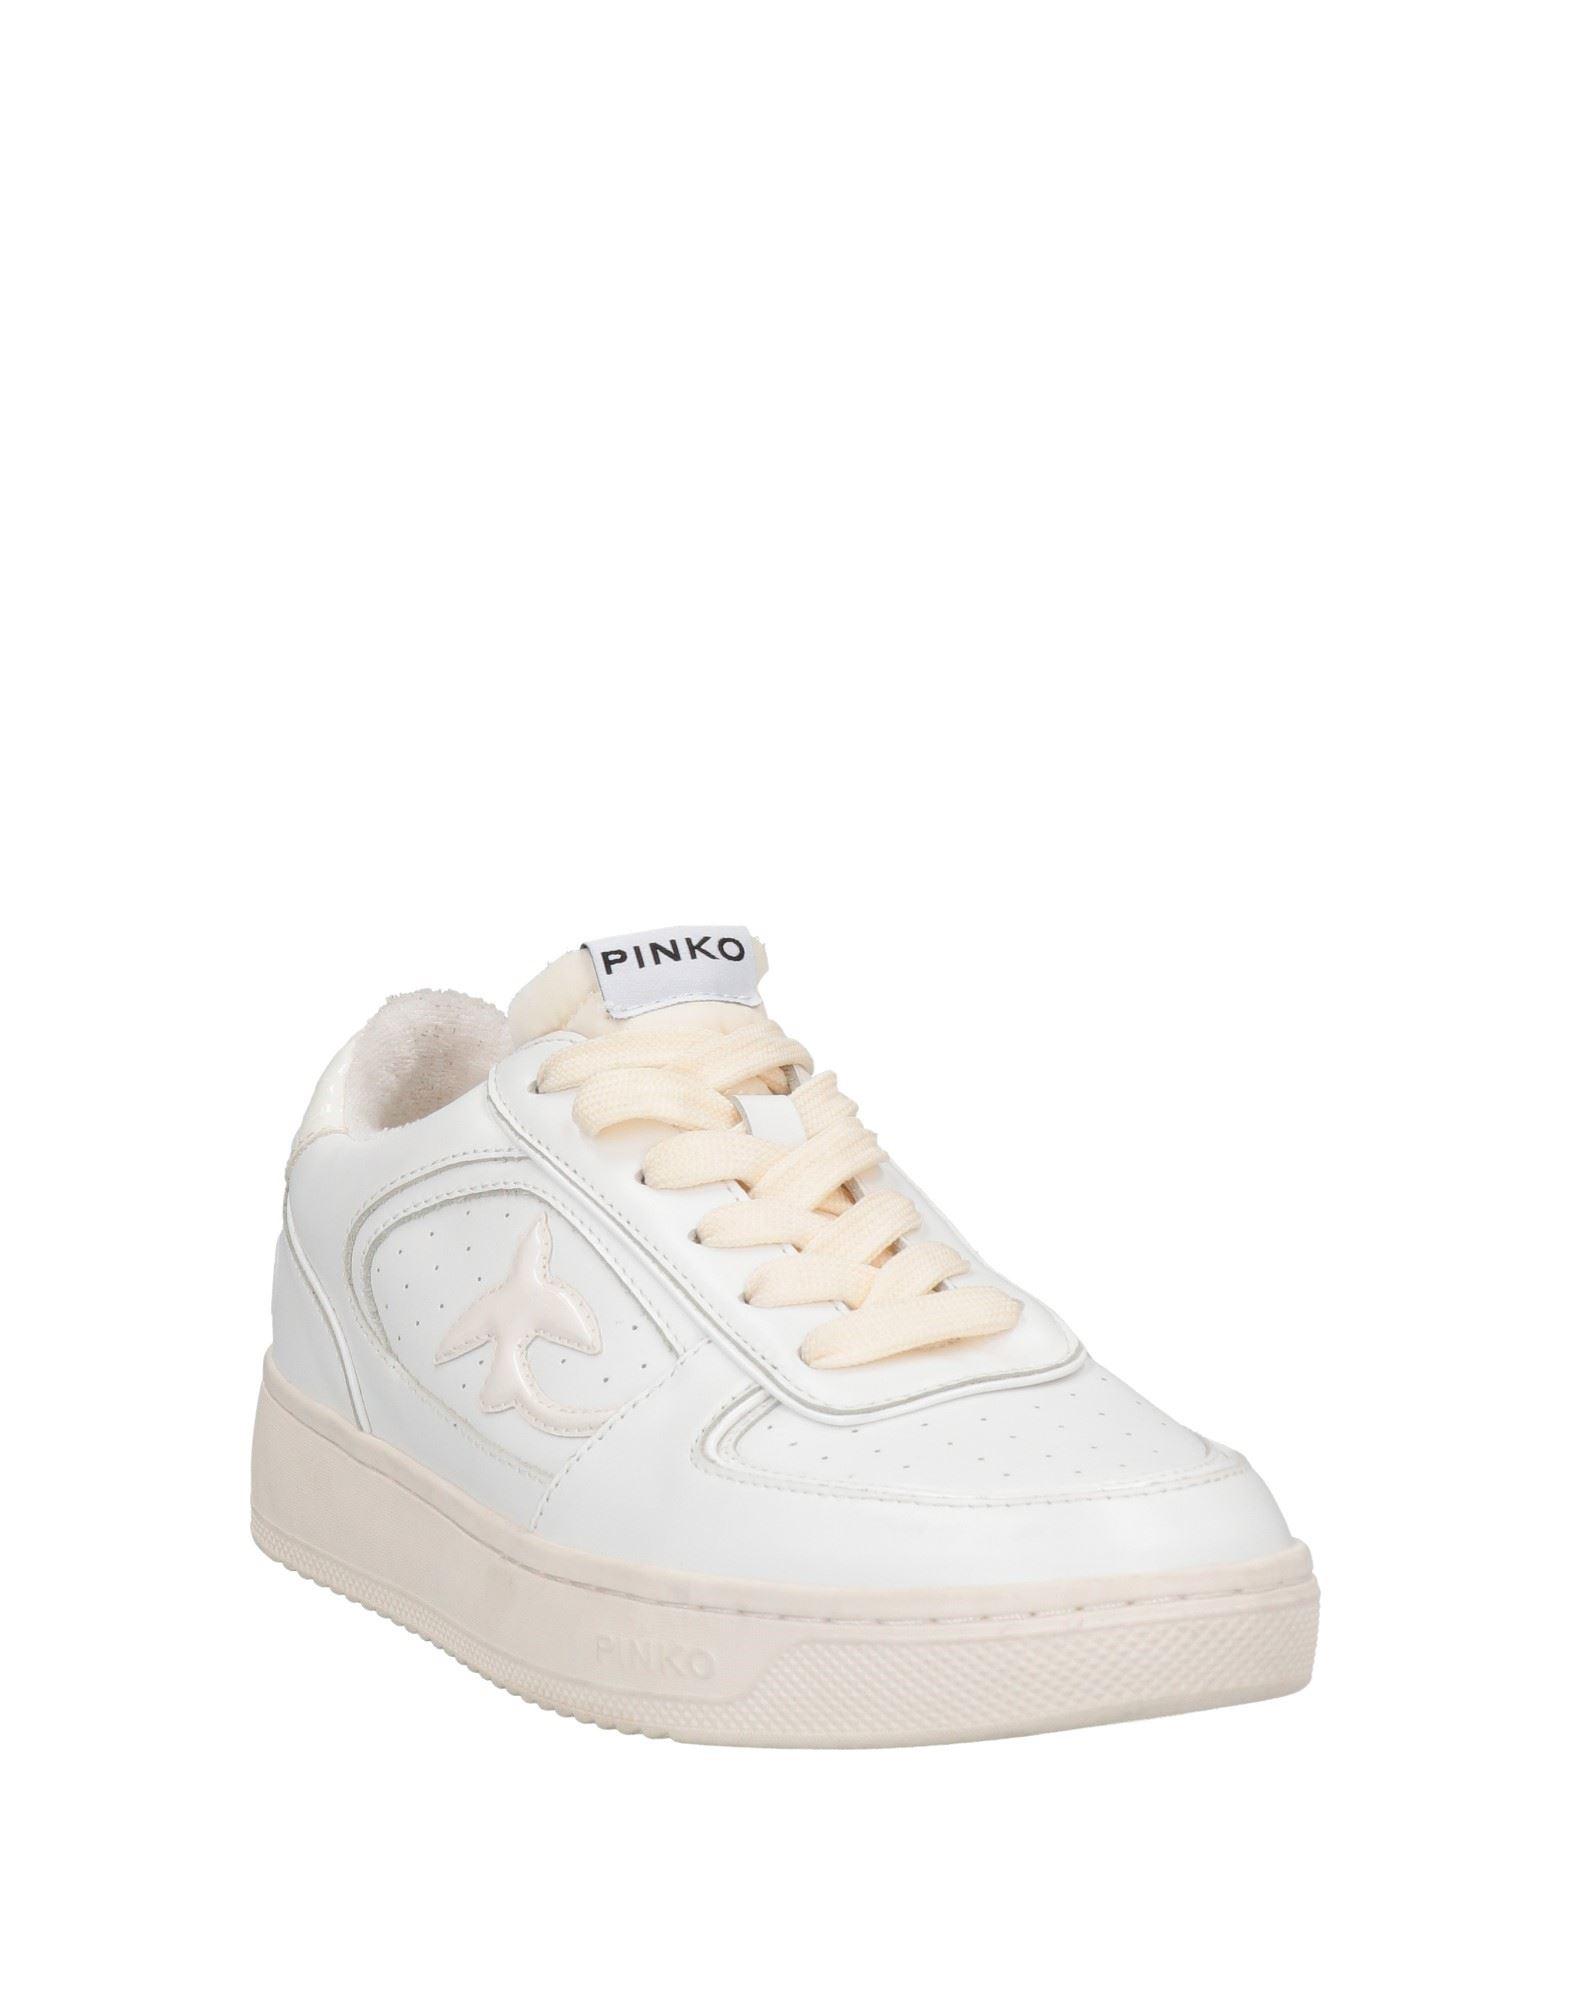 Pinko Sneakers in White | Lyst